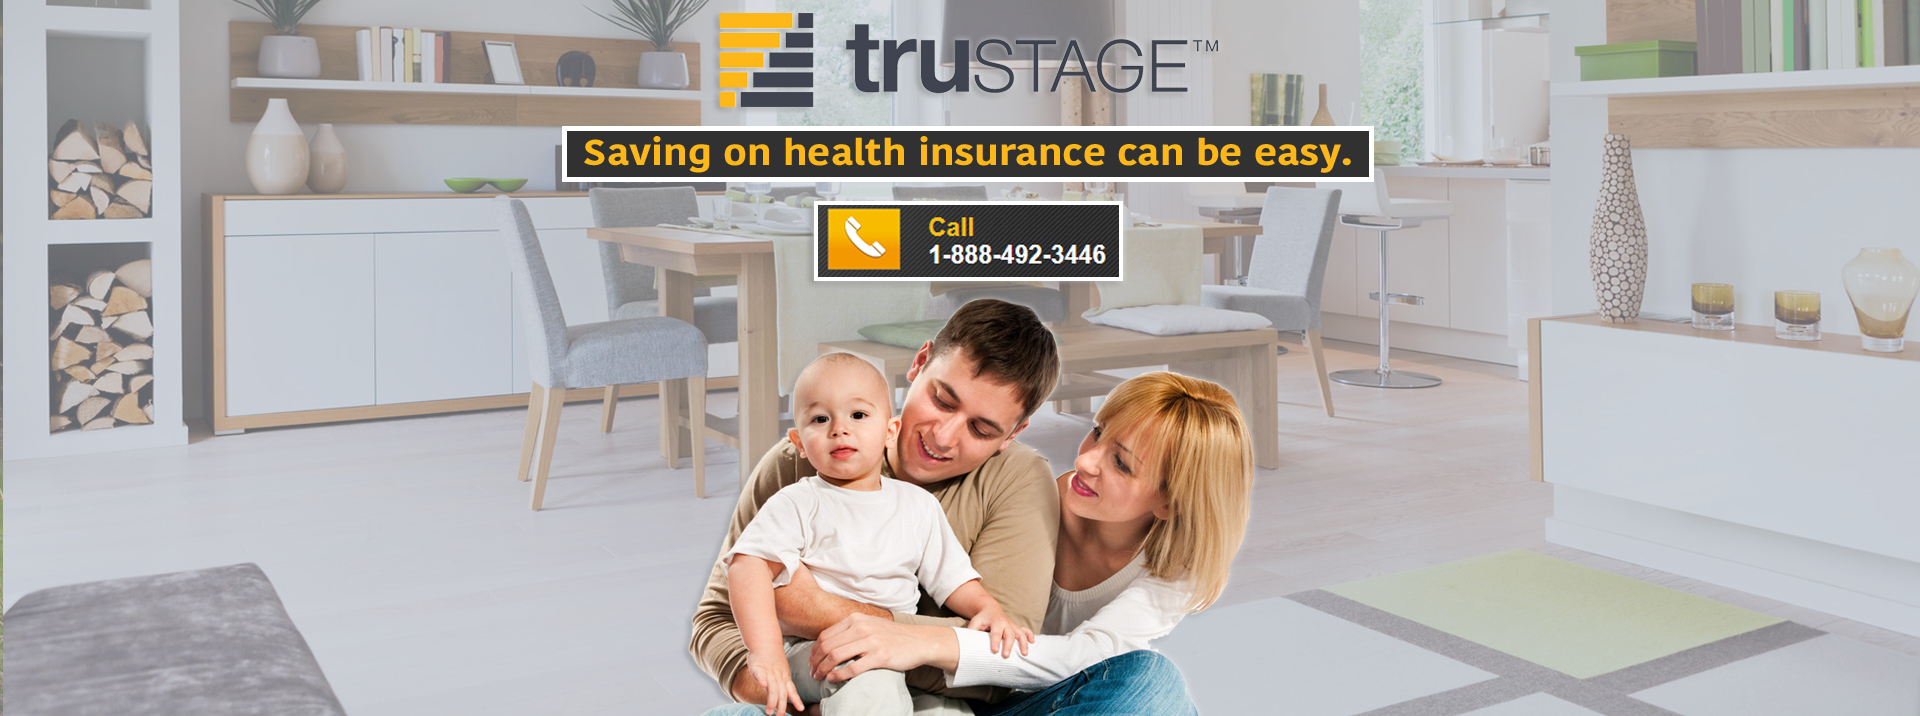 Trustage. Savng on health nsurance can be easy